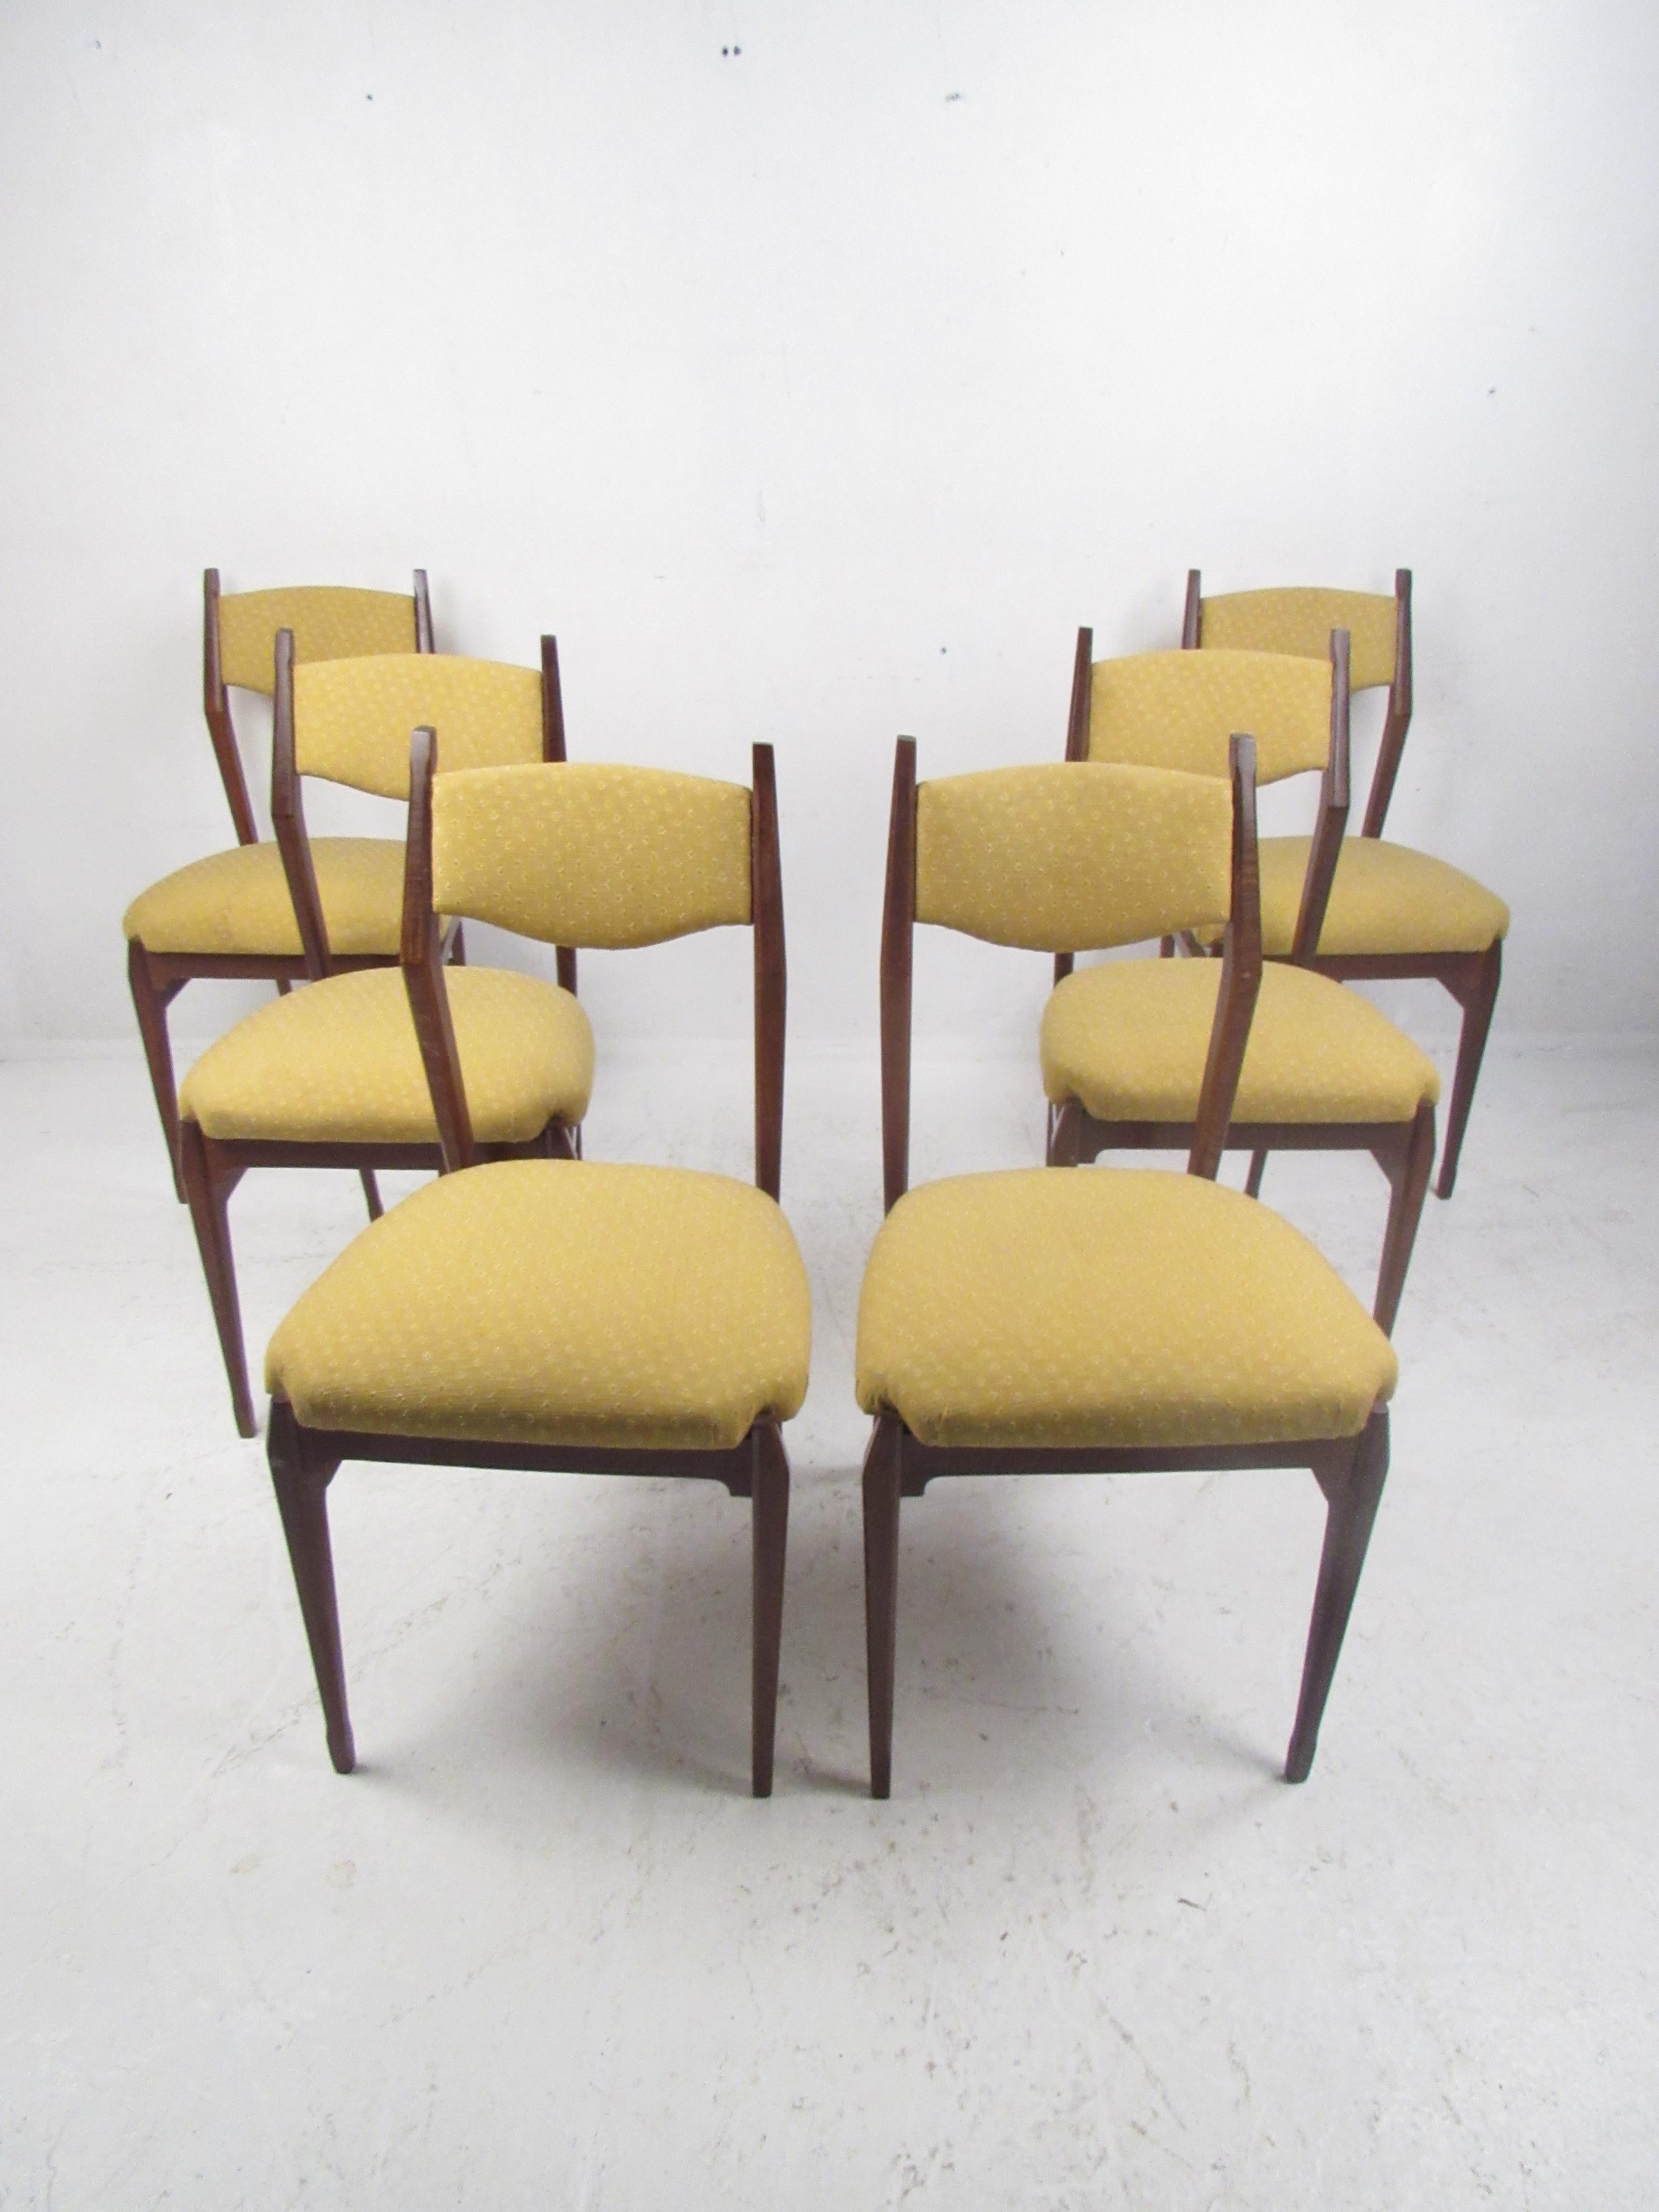 Elegant set of six Mid-Century Modern dining chairs with sculpted wood frames and floating backrests. A sleek and comfortable design that complements any seating arrangement. The thick padded seat and backrest are covered in decorative plush yellow